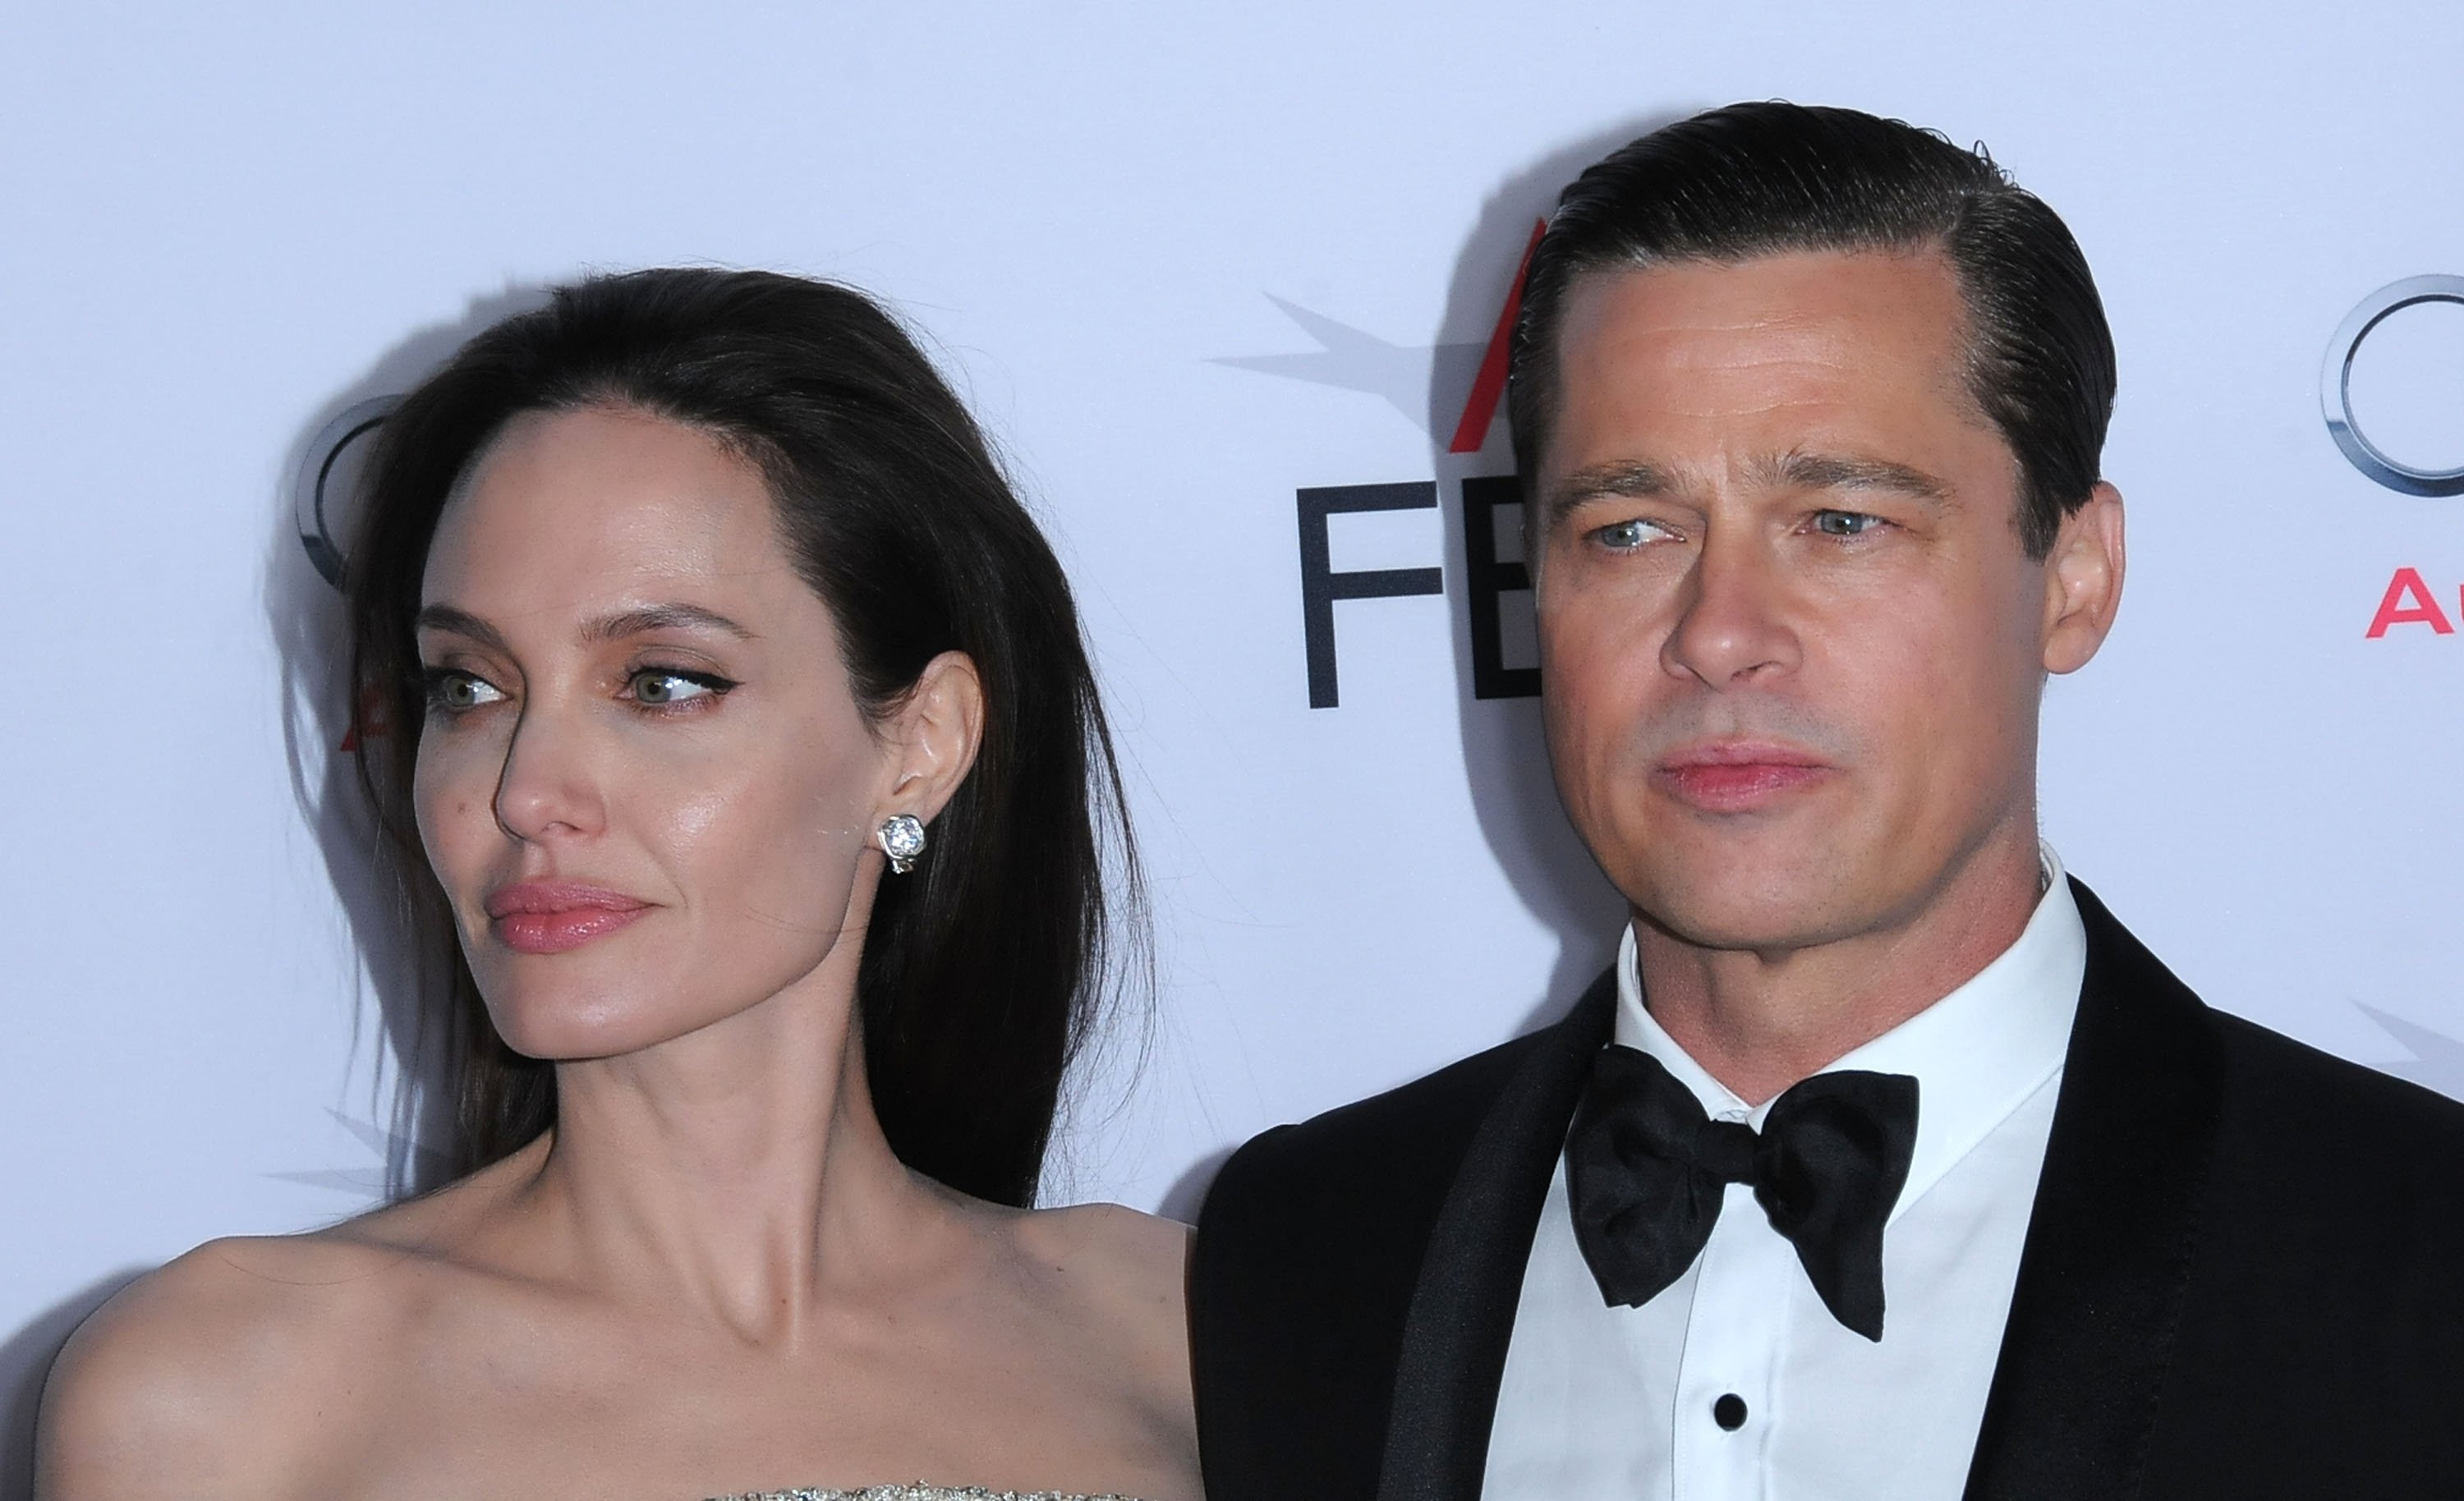  Actress Angelina Jolie and actor Brad Pitt arrive at AFI FEST 2015 Presented By Audi Opening Night Gala Premiere Of Universal Pictures' 'By The Sea' at TCL Chinese 6 Theatres on November 5, 2015. | Photo: Getty Images